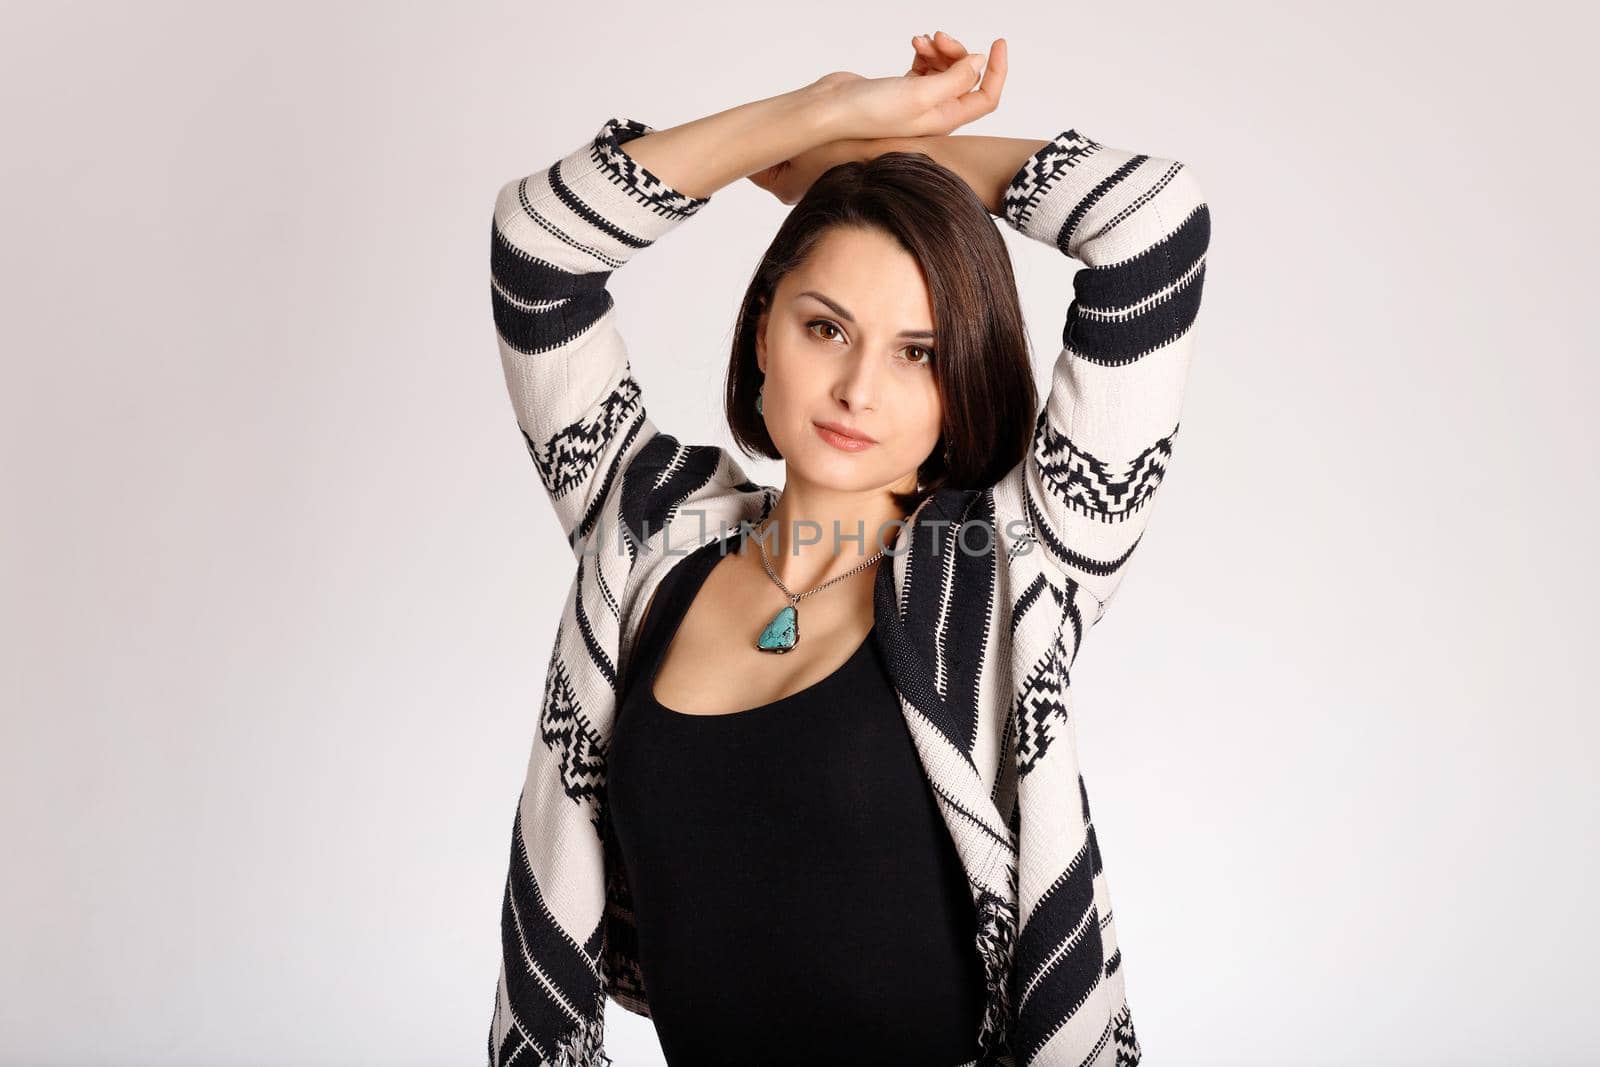 Aztec print clothes on beautiful fashion young woman on white background.